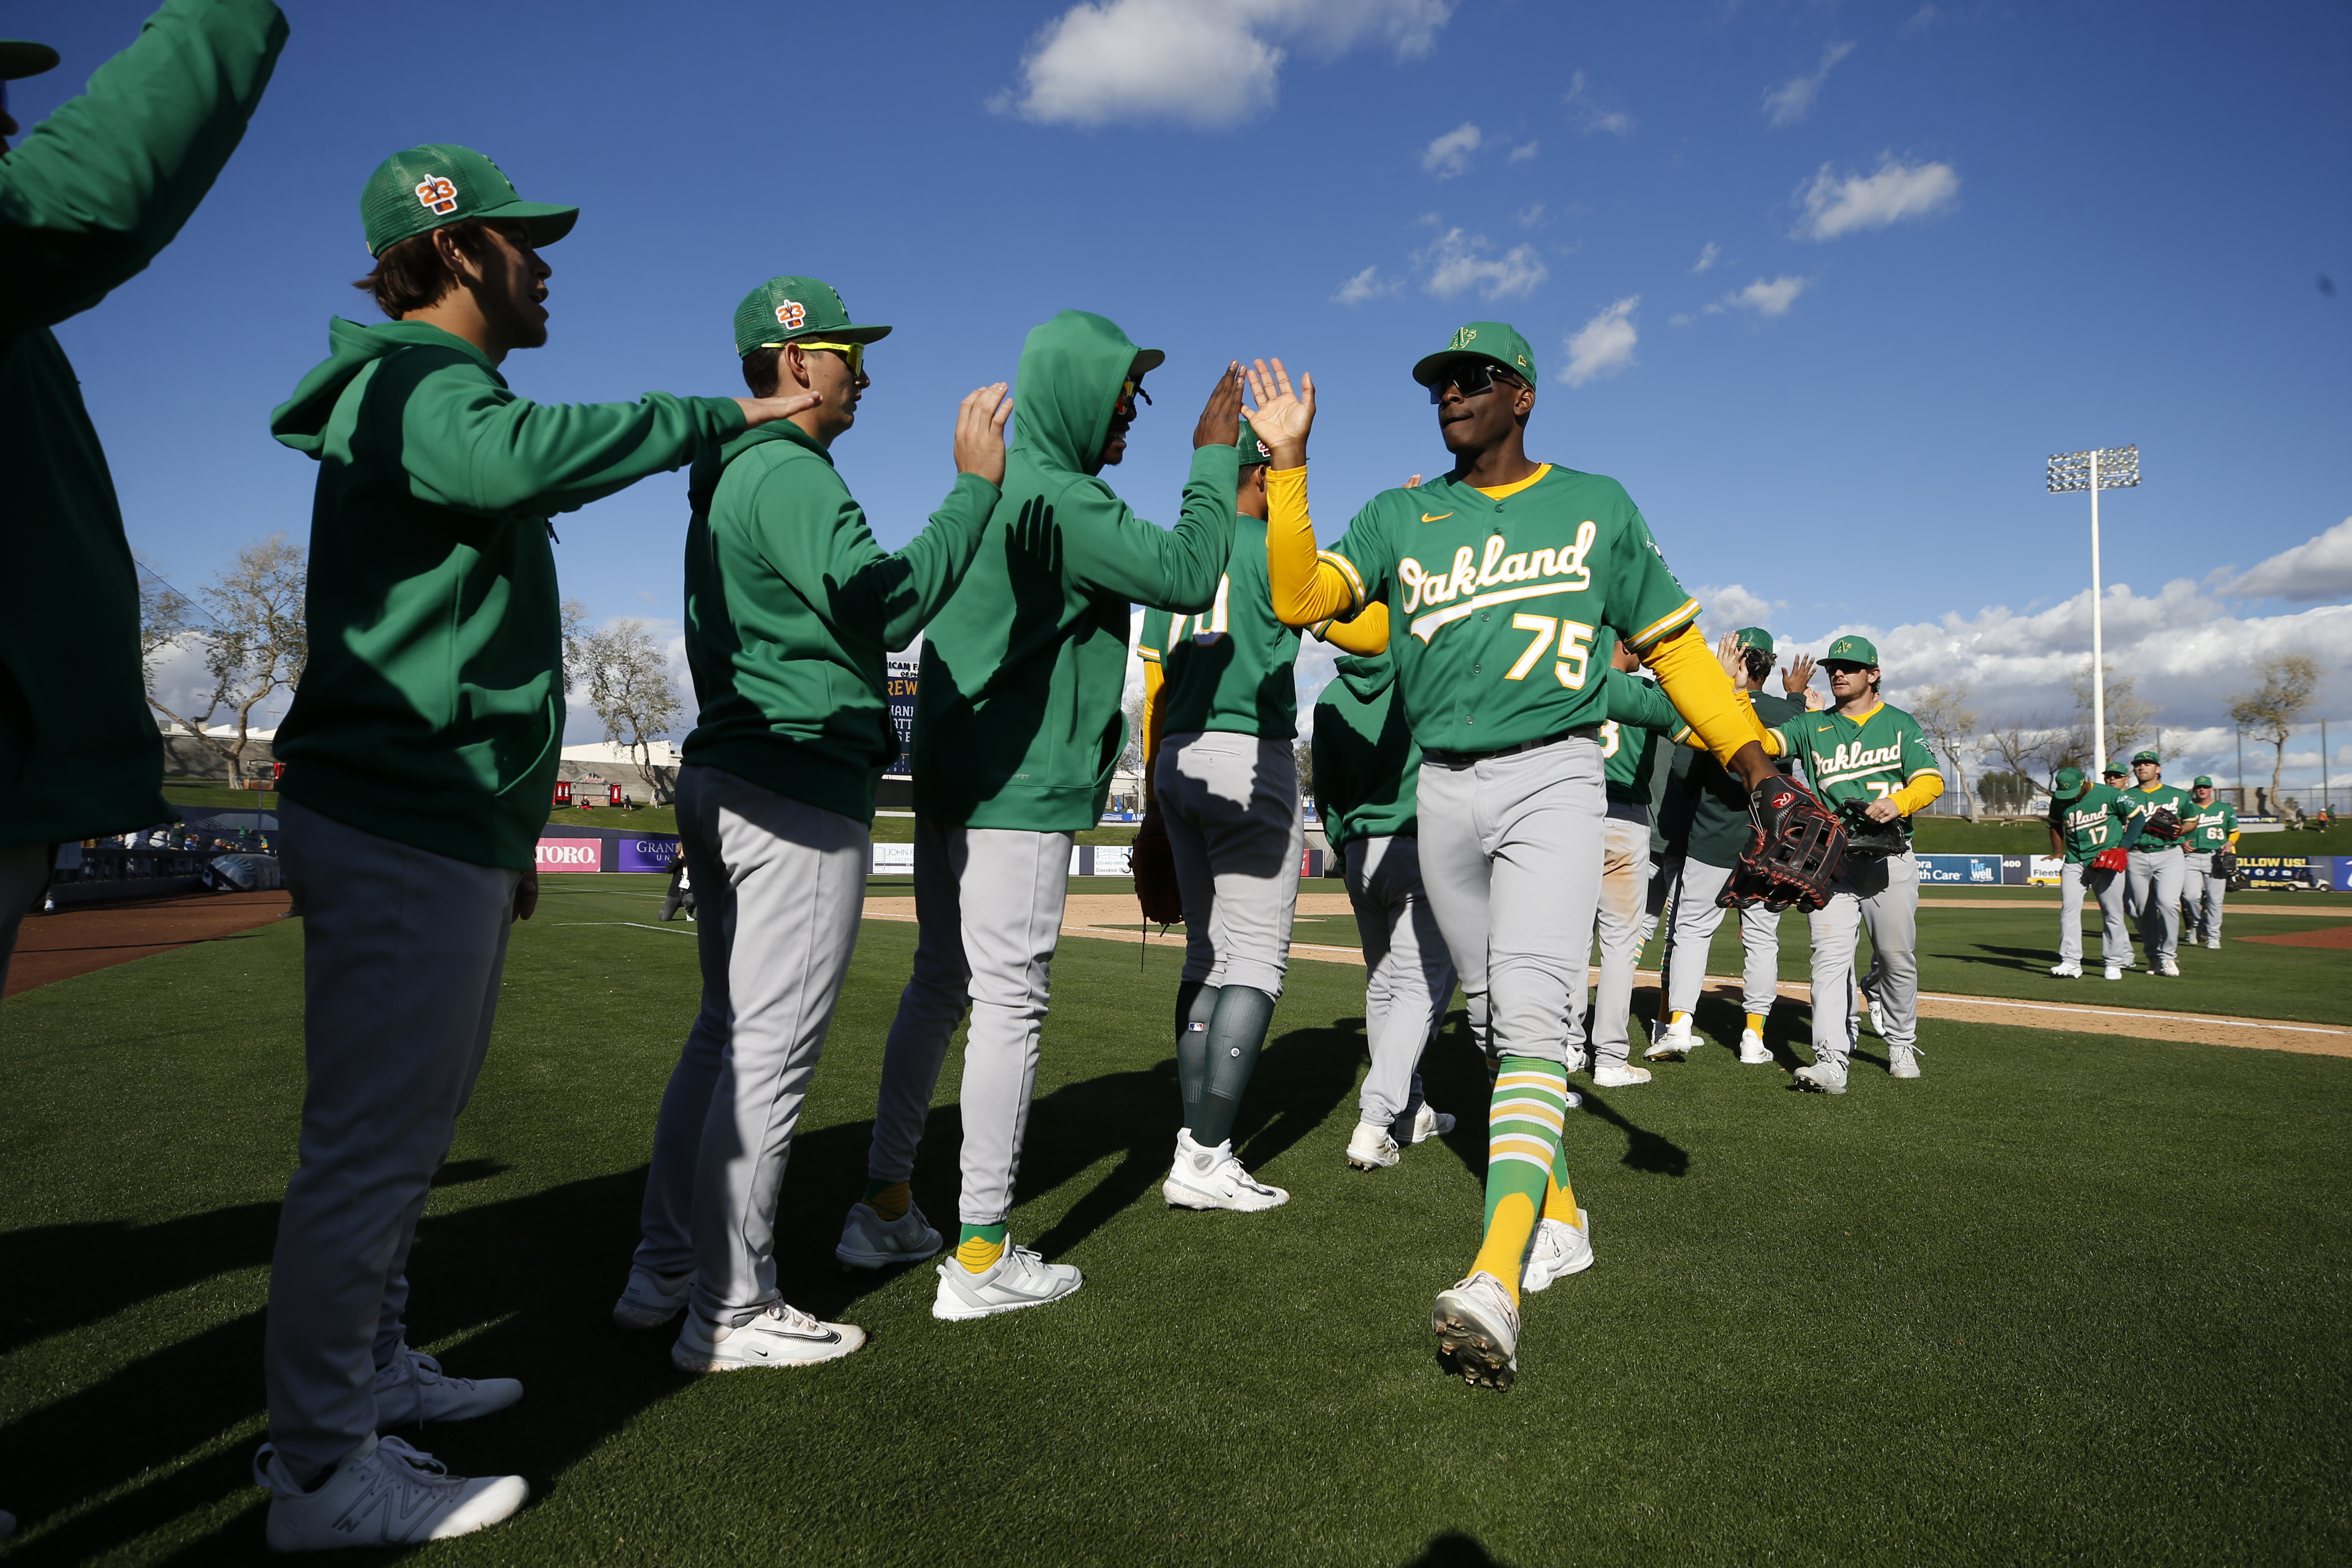 The A's Moving Out of Oakland Is A Crushing Blow For Baseball